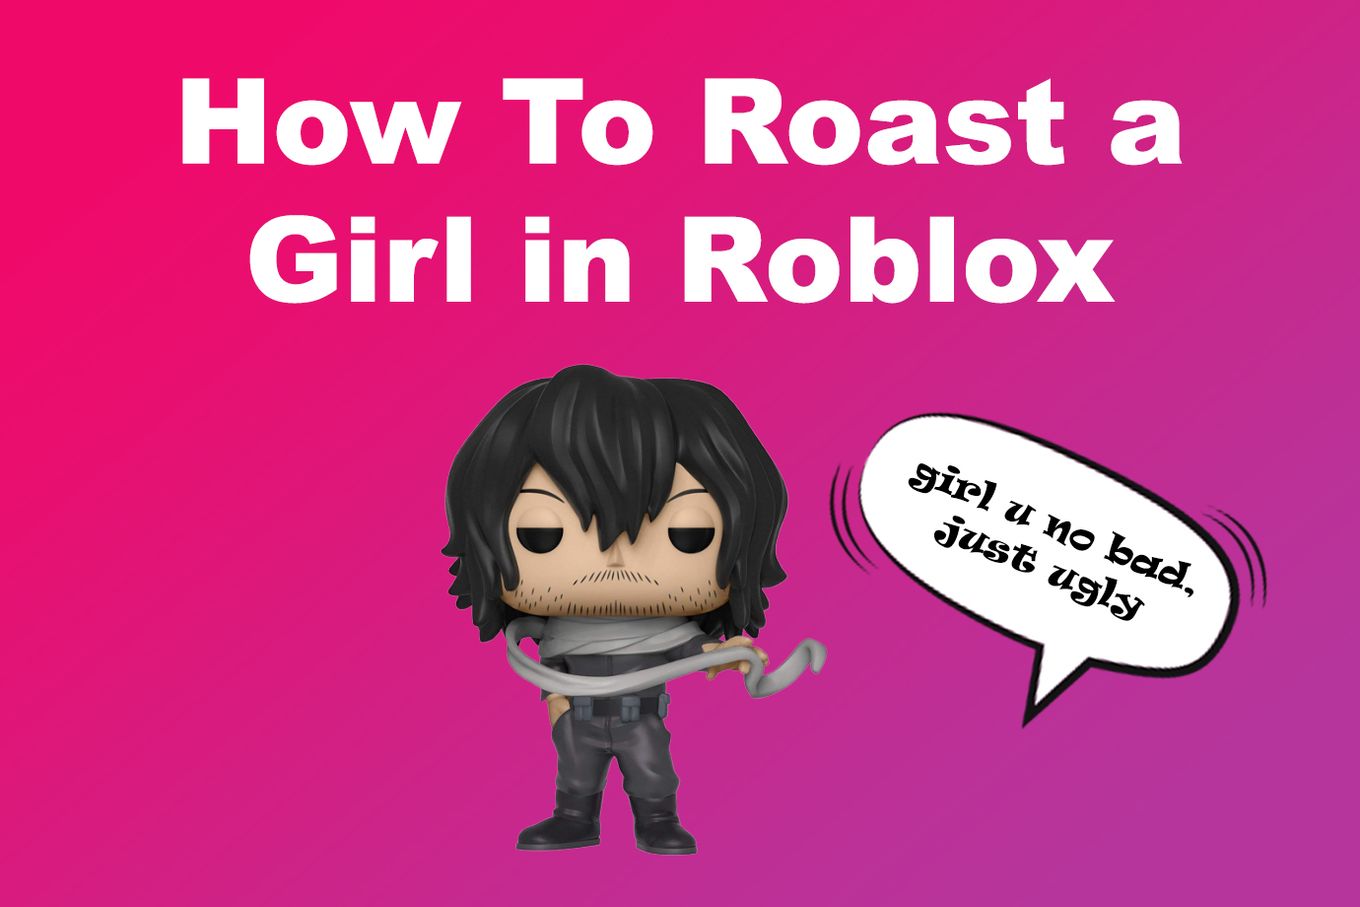 How To Roast a Girl in Roblox